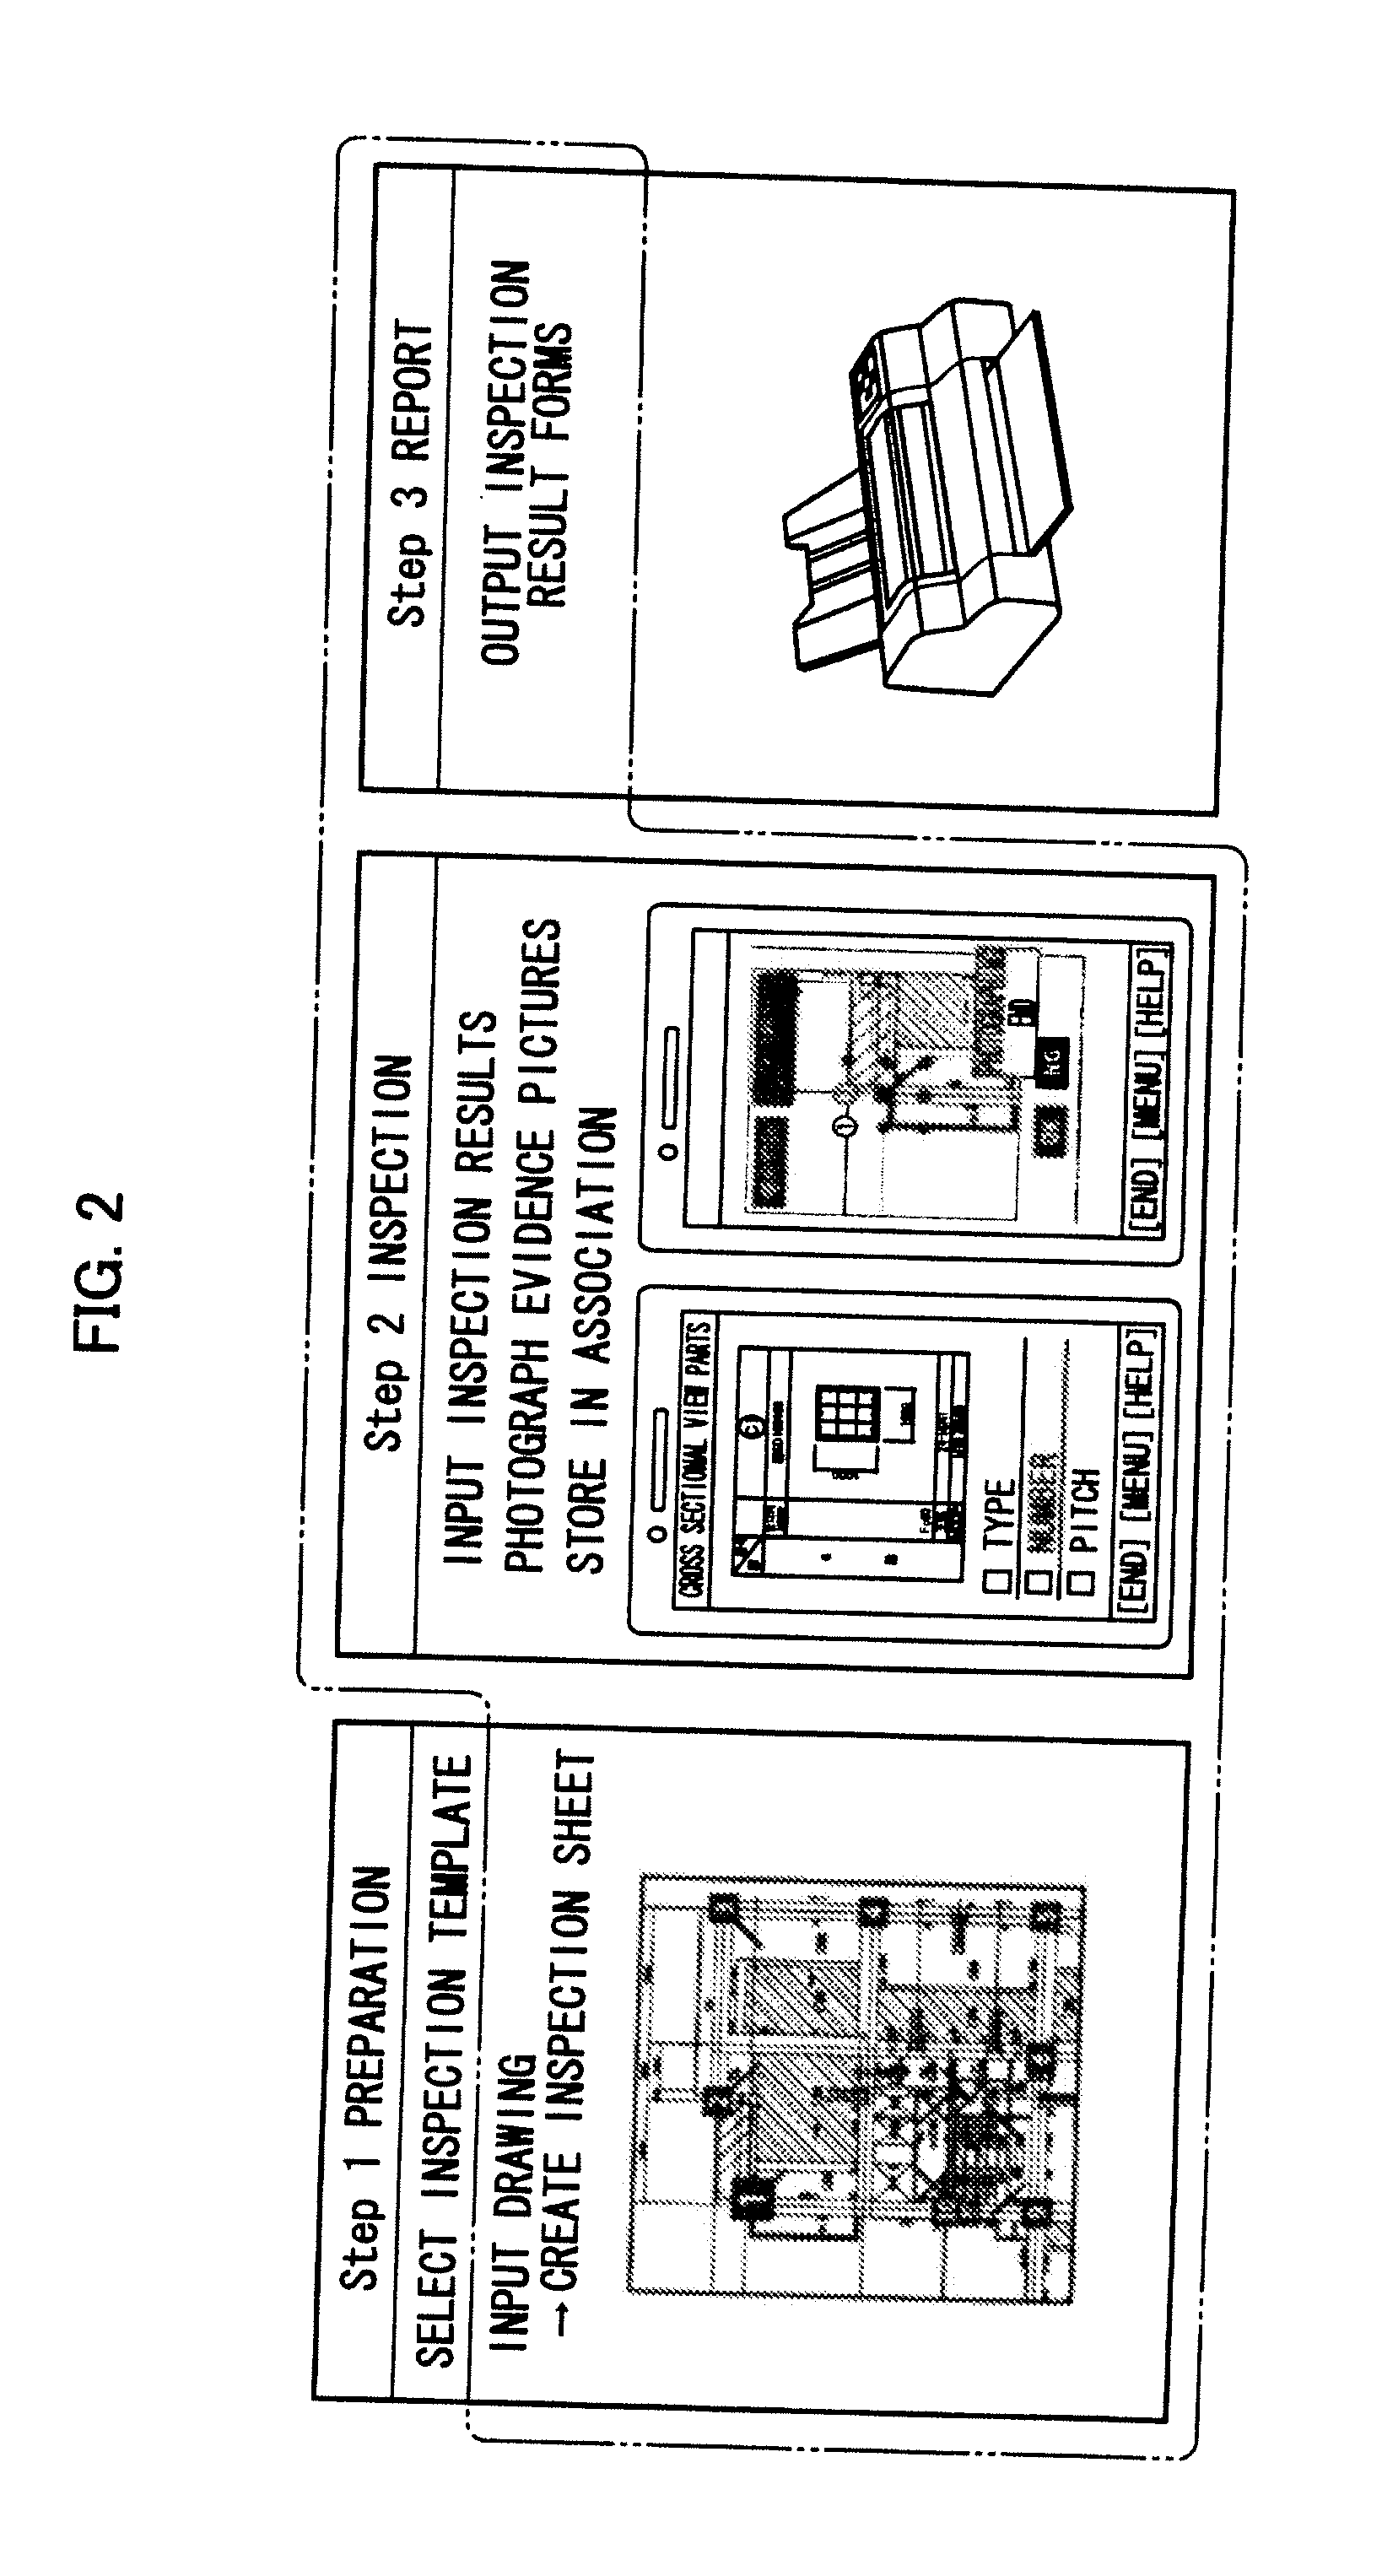 Inspection information processing apparatus and method